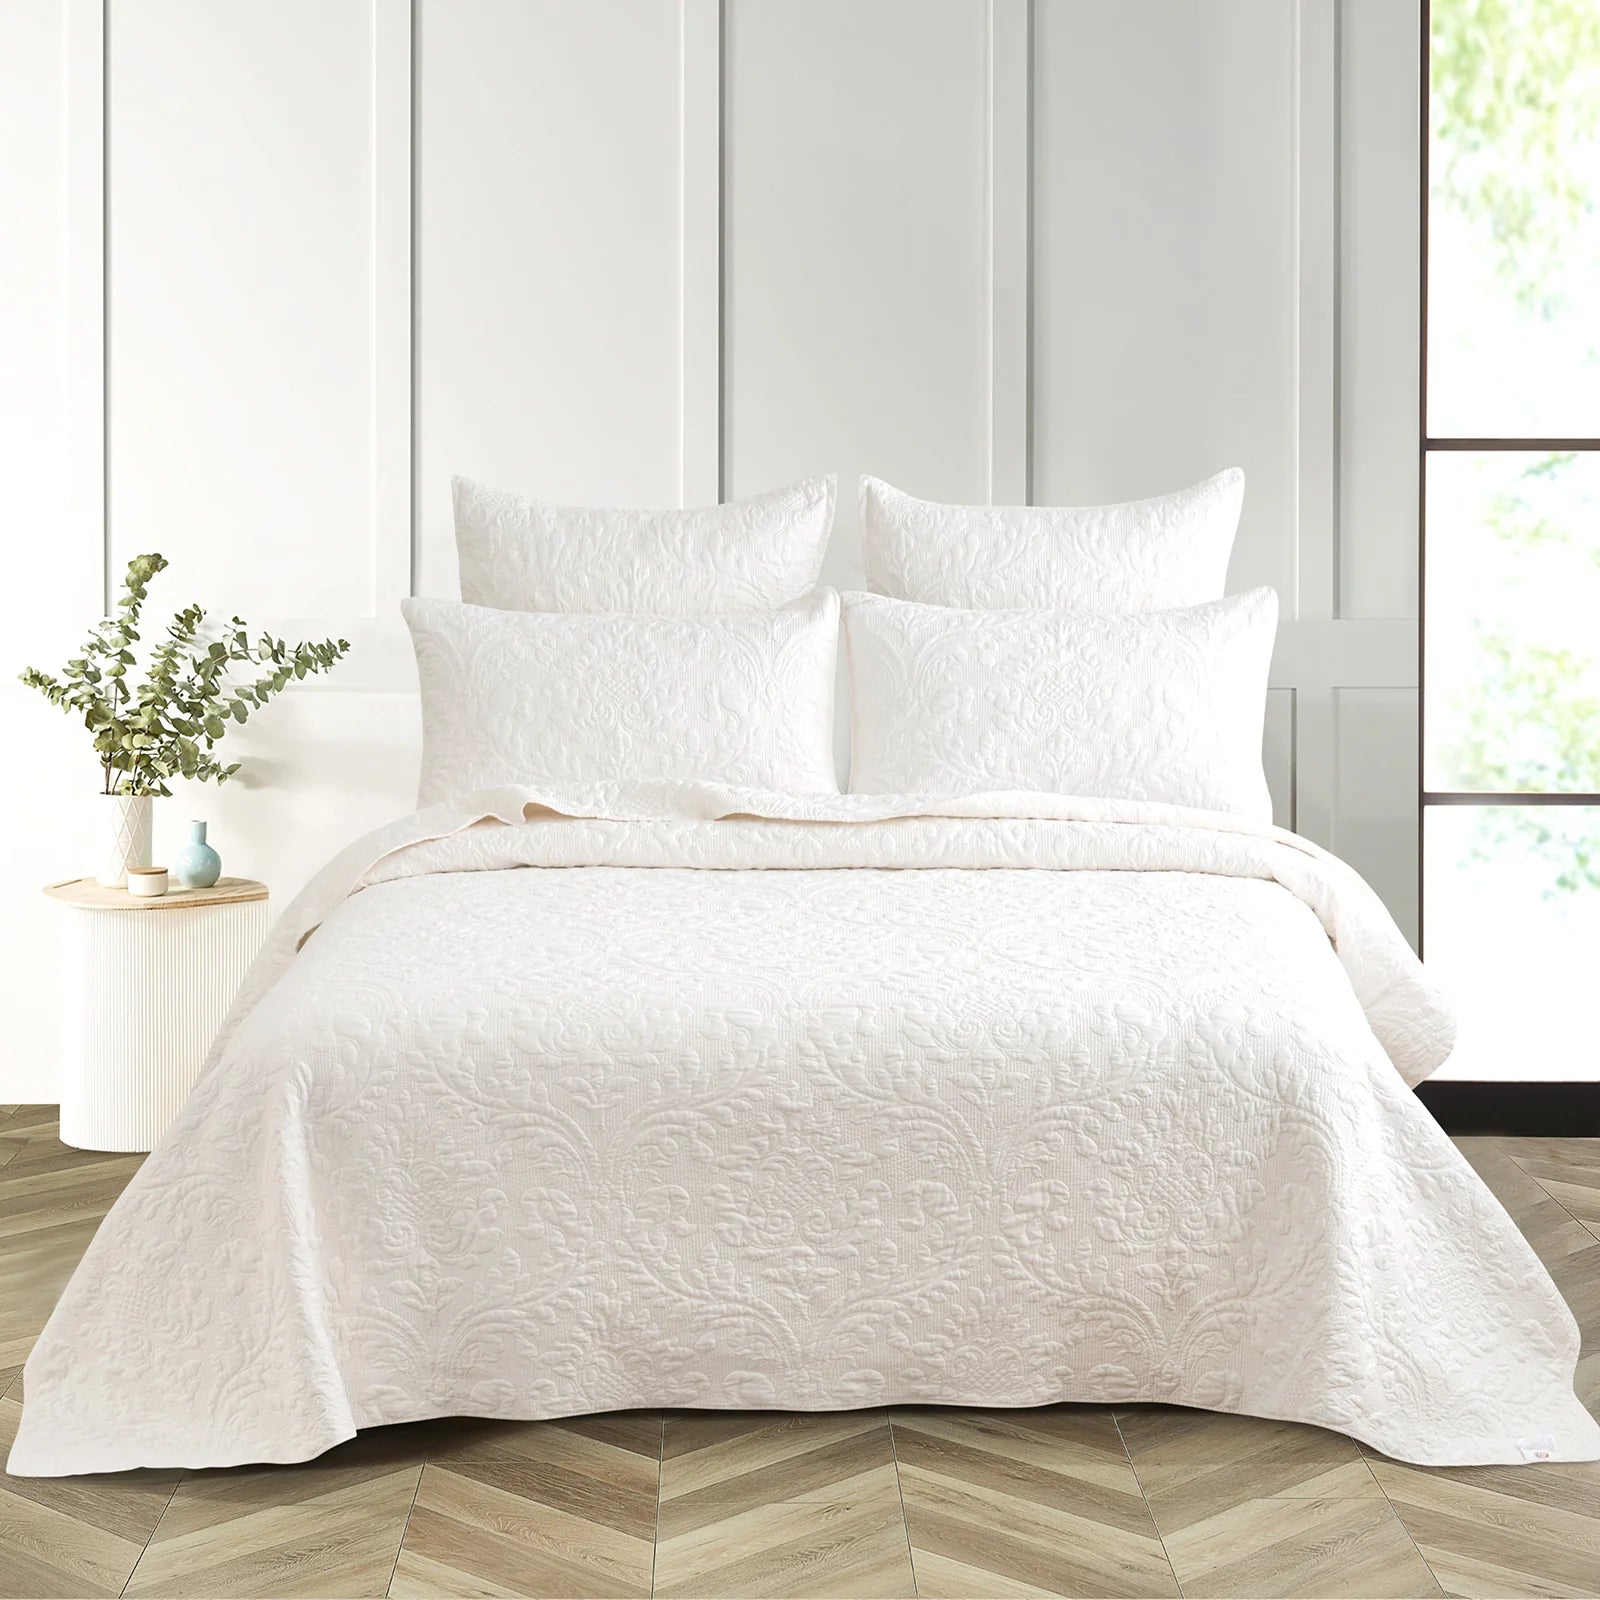 Our Berlin jacquard Coverlet set is a damask woven style fabric is a luxurious and intricate textile that is often used for coverlets and other decorative items. It is characterized by its distinct weaving technique, which creates a raised pattern on the fabric surface. Compliment crinkle effect, with a sham edge border is eye catching.  